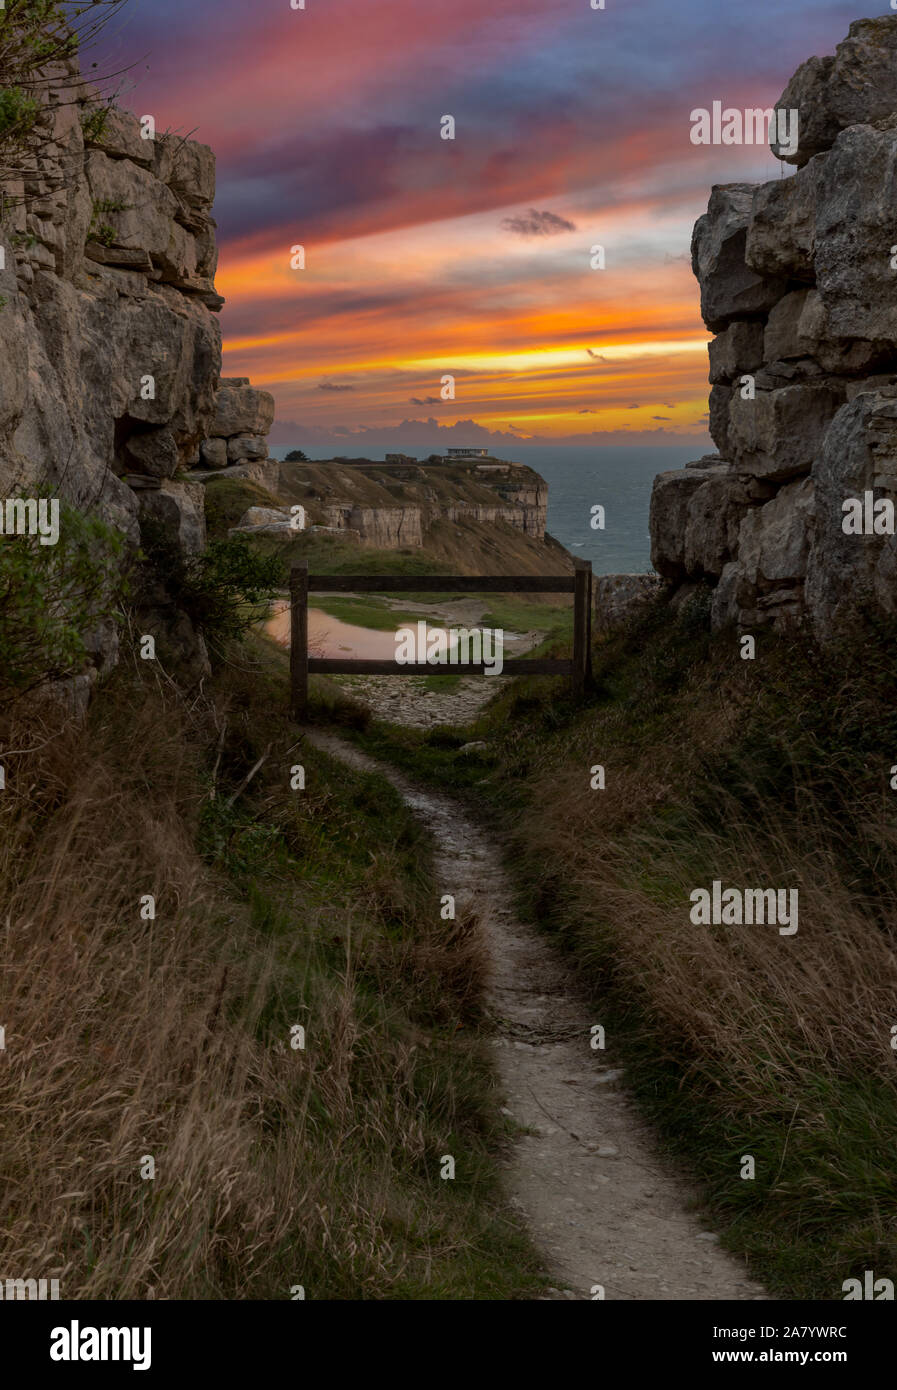 Portland Dorset England Beautiful sunset seen from the South West Coast Path, showing the dramatic cliff scenery of the west coast of Portland Stock Photo